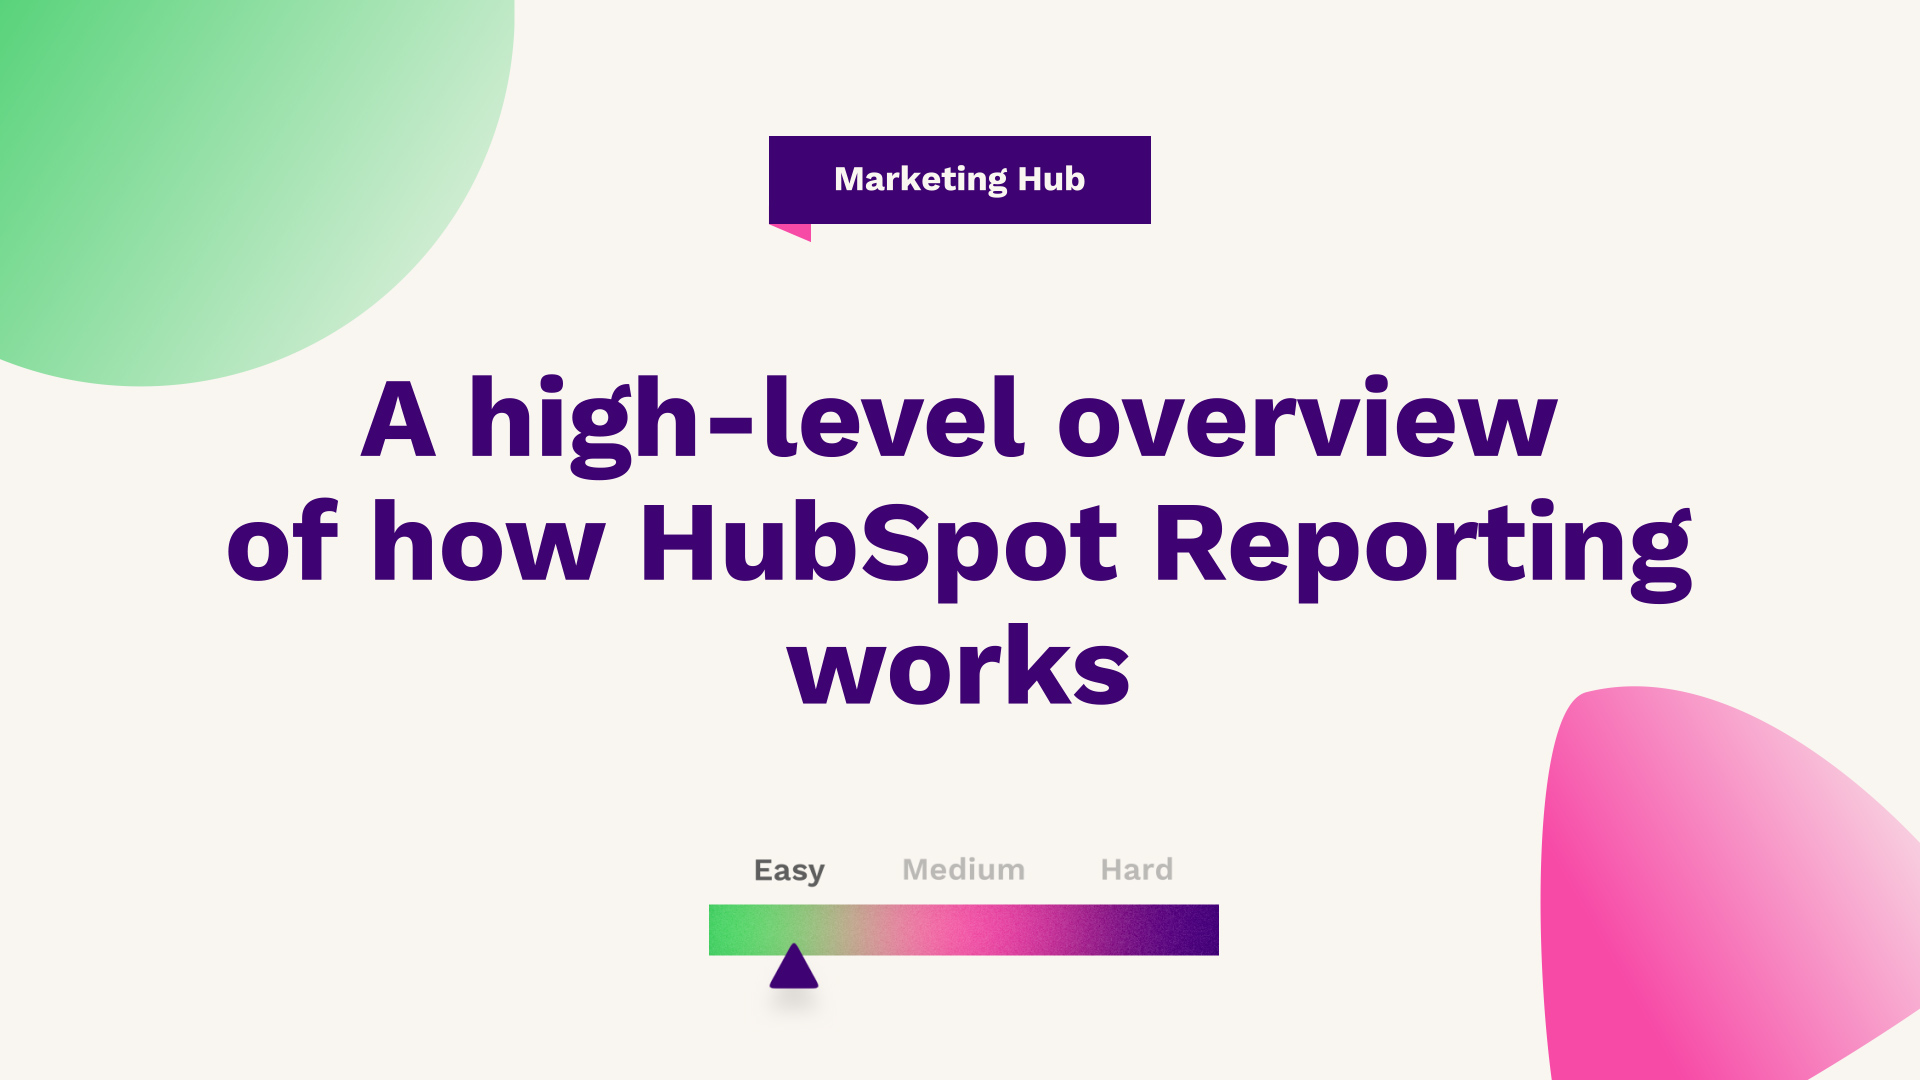 A high-level overview of how HubSpot reporting works